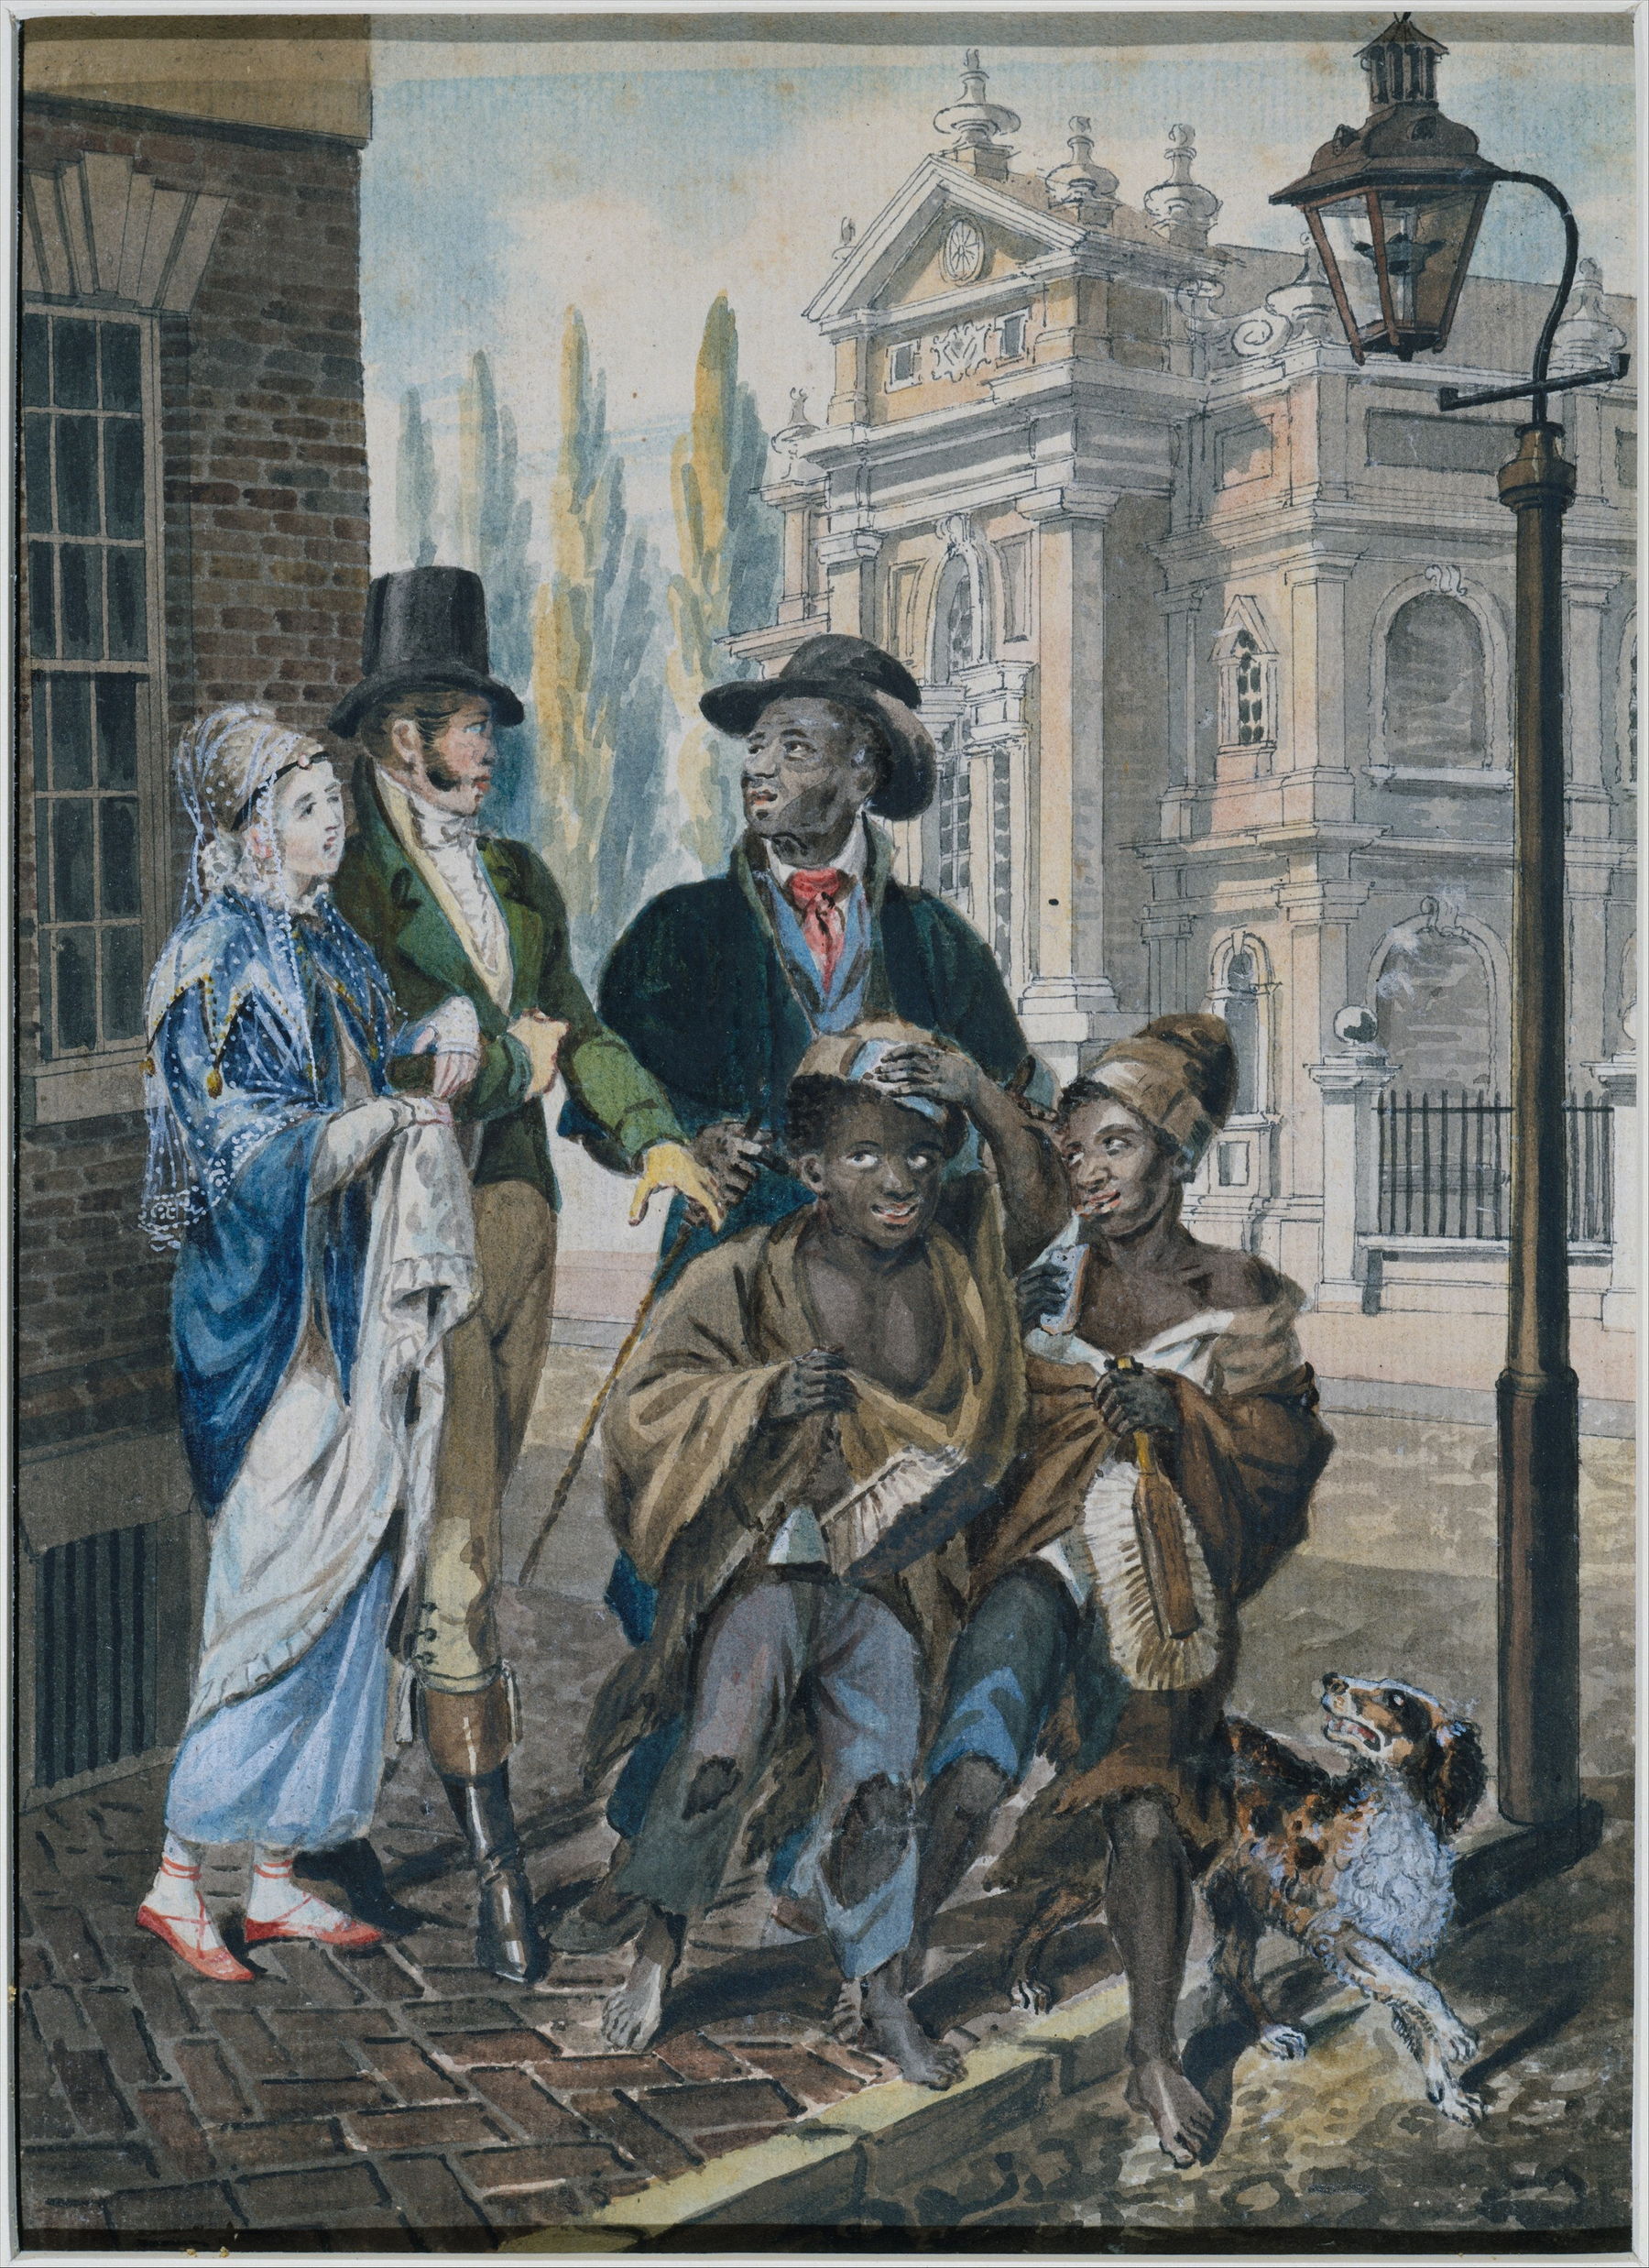 Worldly Folk Questioning Chimney Sweeps and Their Master before Christ Church, Philadelphia by John Lewis Krimmel